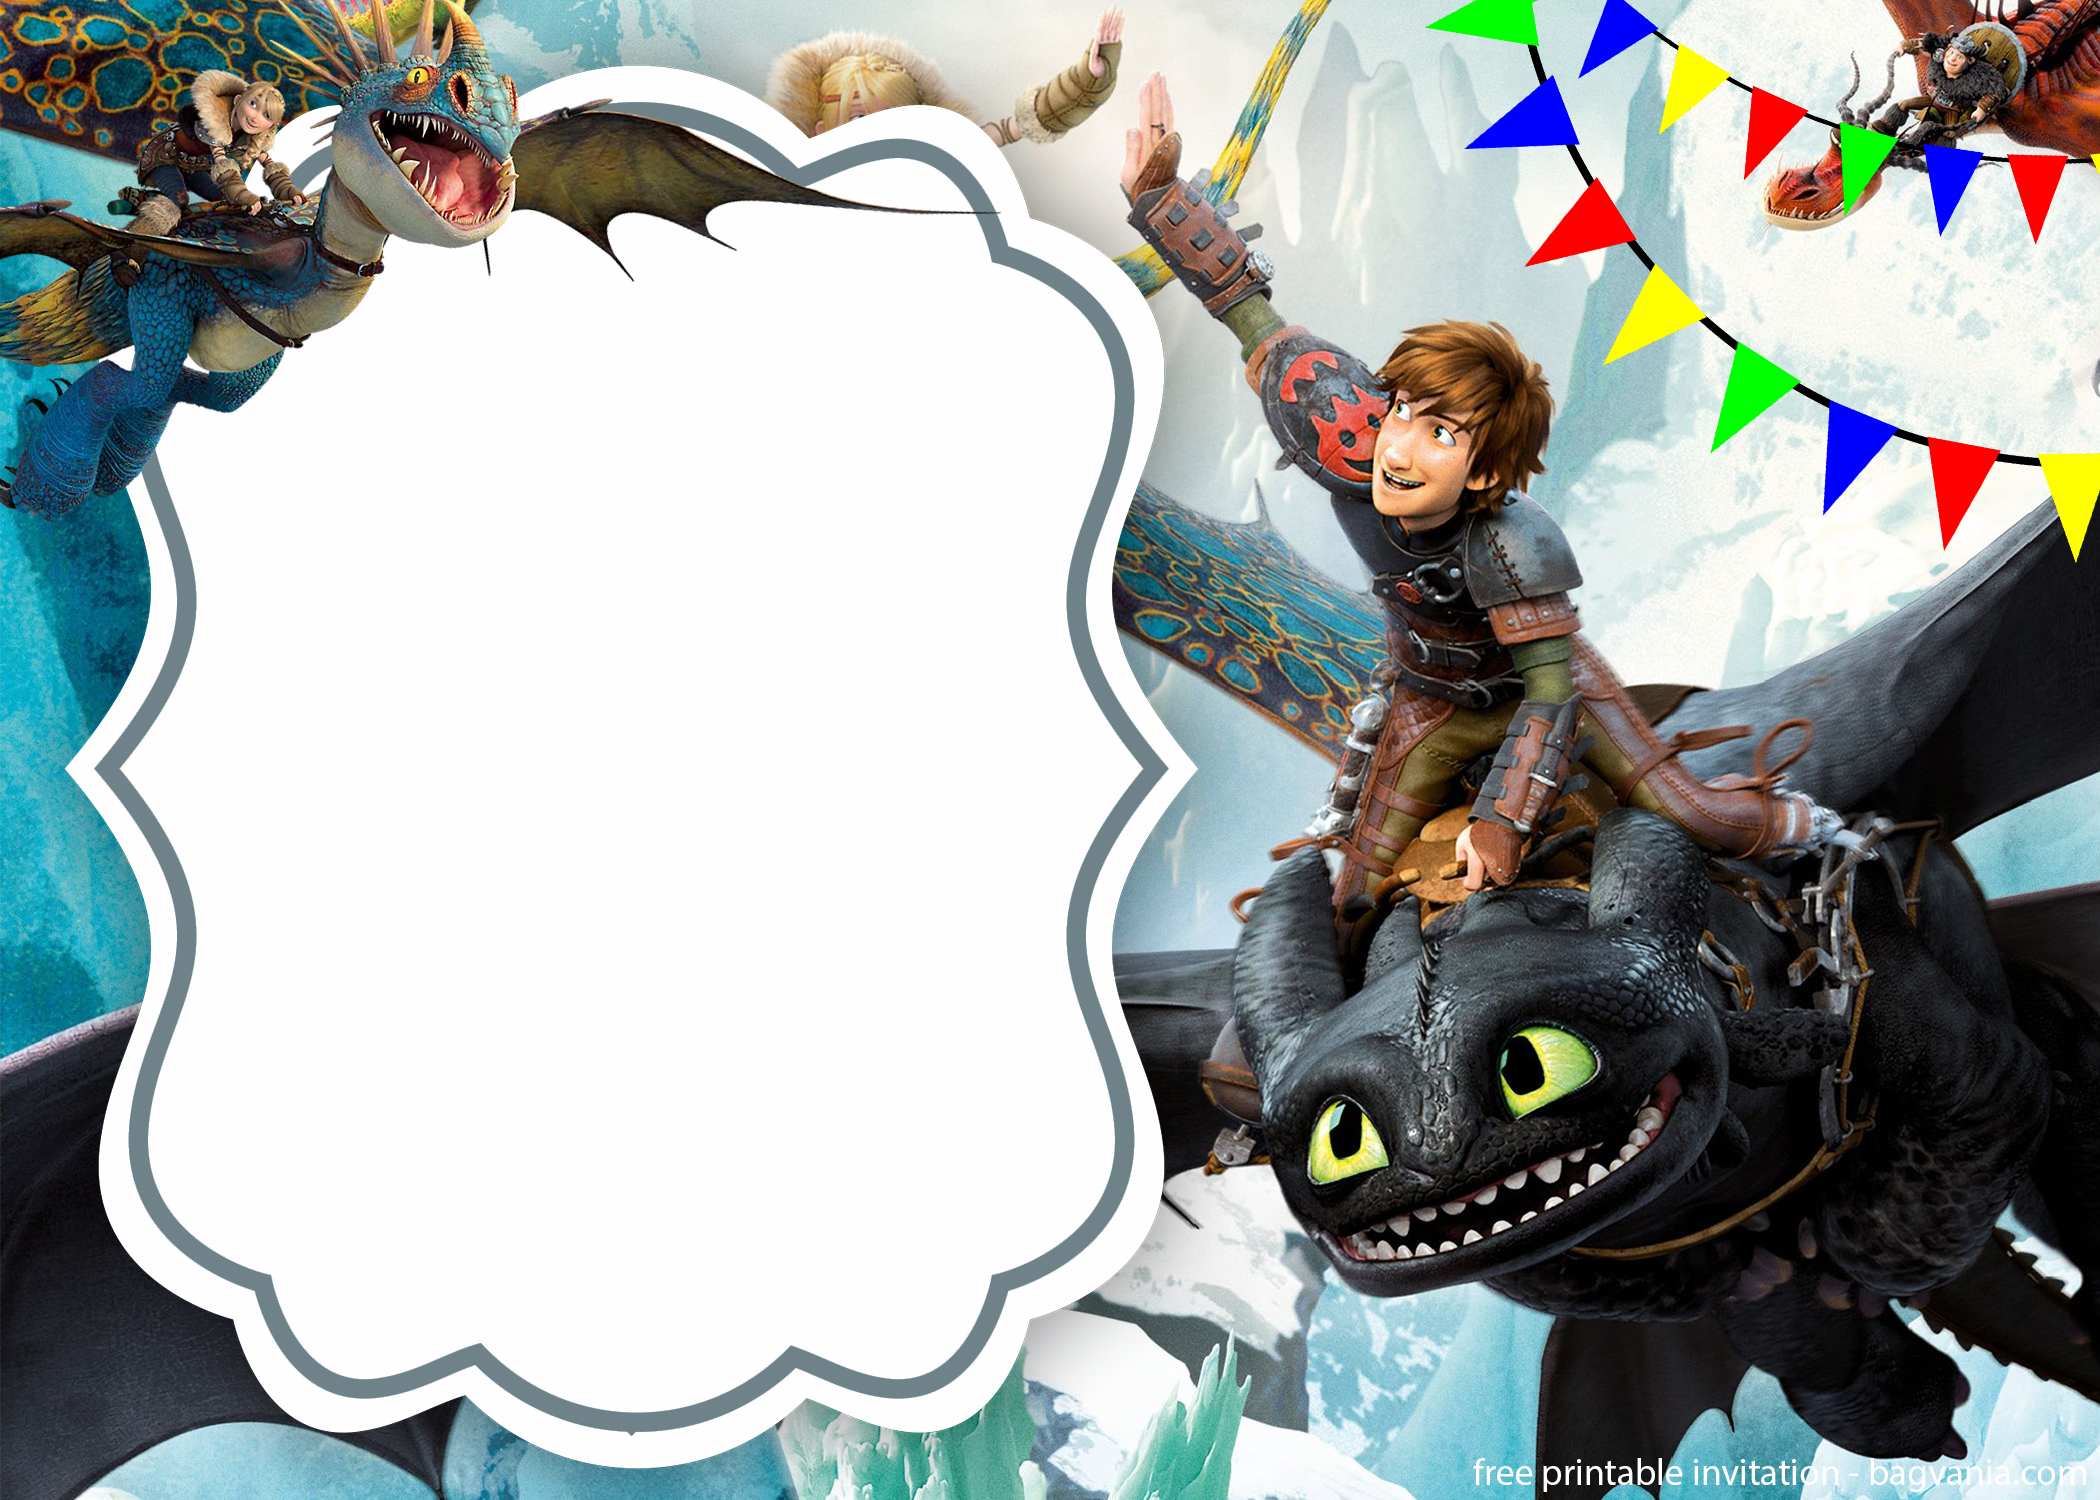 free-download-how-to-train-your-dragon-invitation-free-printable